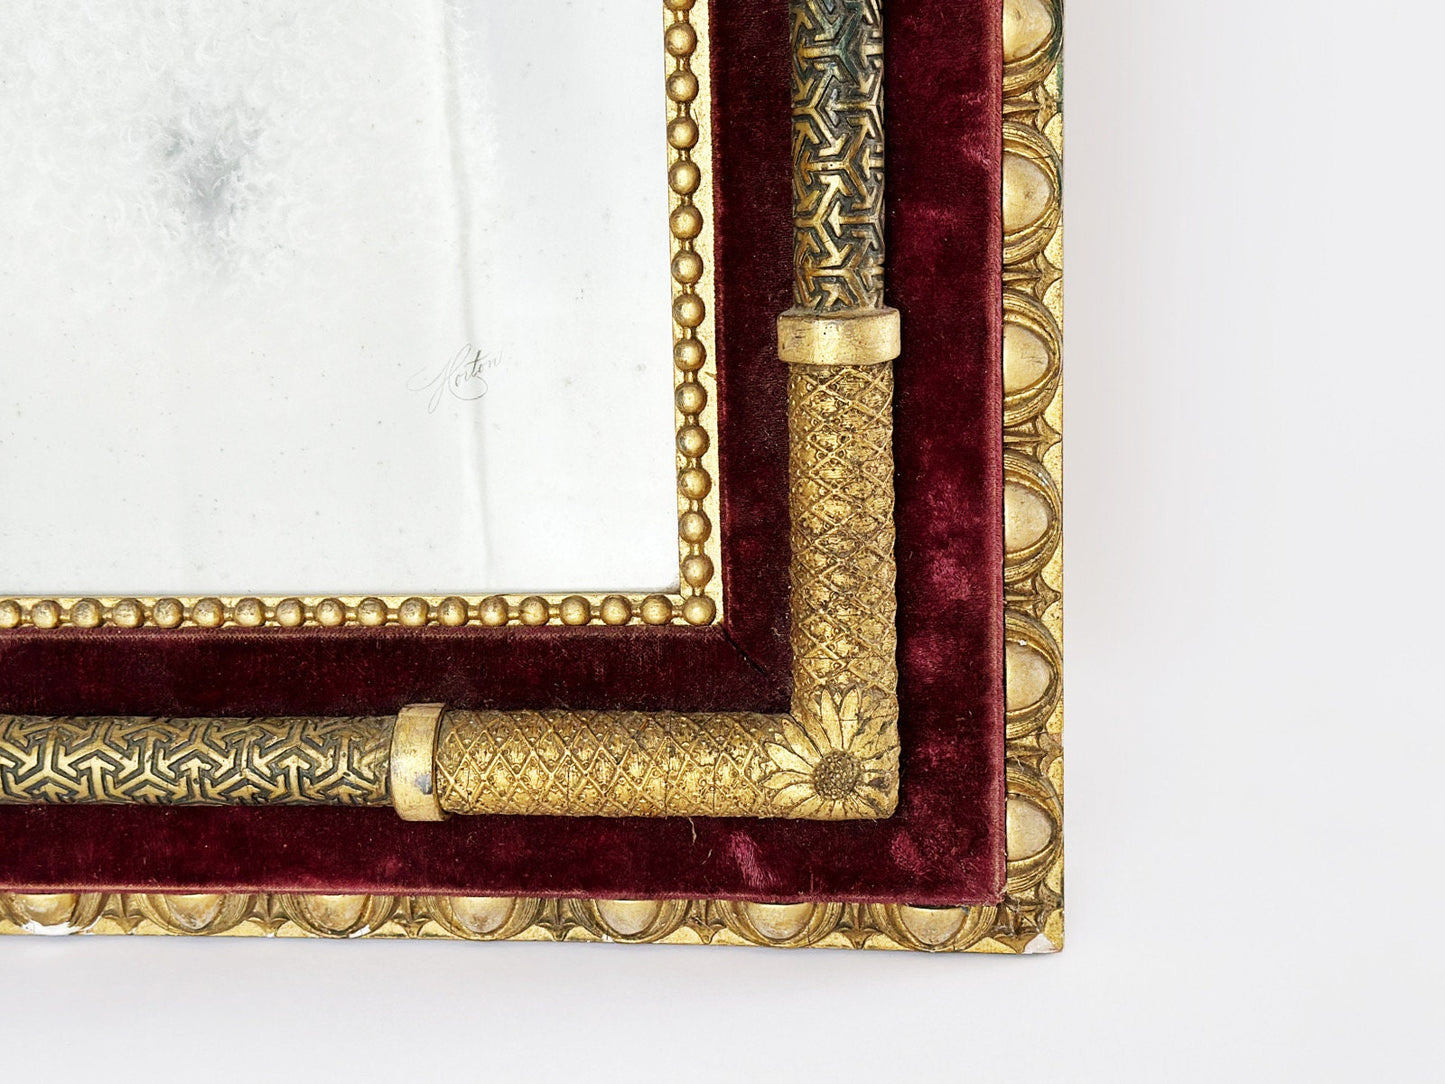 Bottom corner of ornate Victorian frame with another view of the flower detail of the corner. The gold accents of the frame are accentuated by the placement over a rich red velvet.